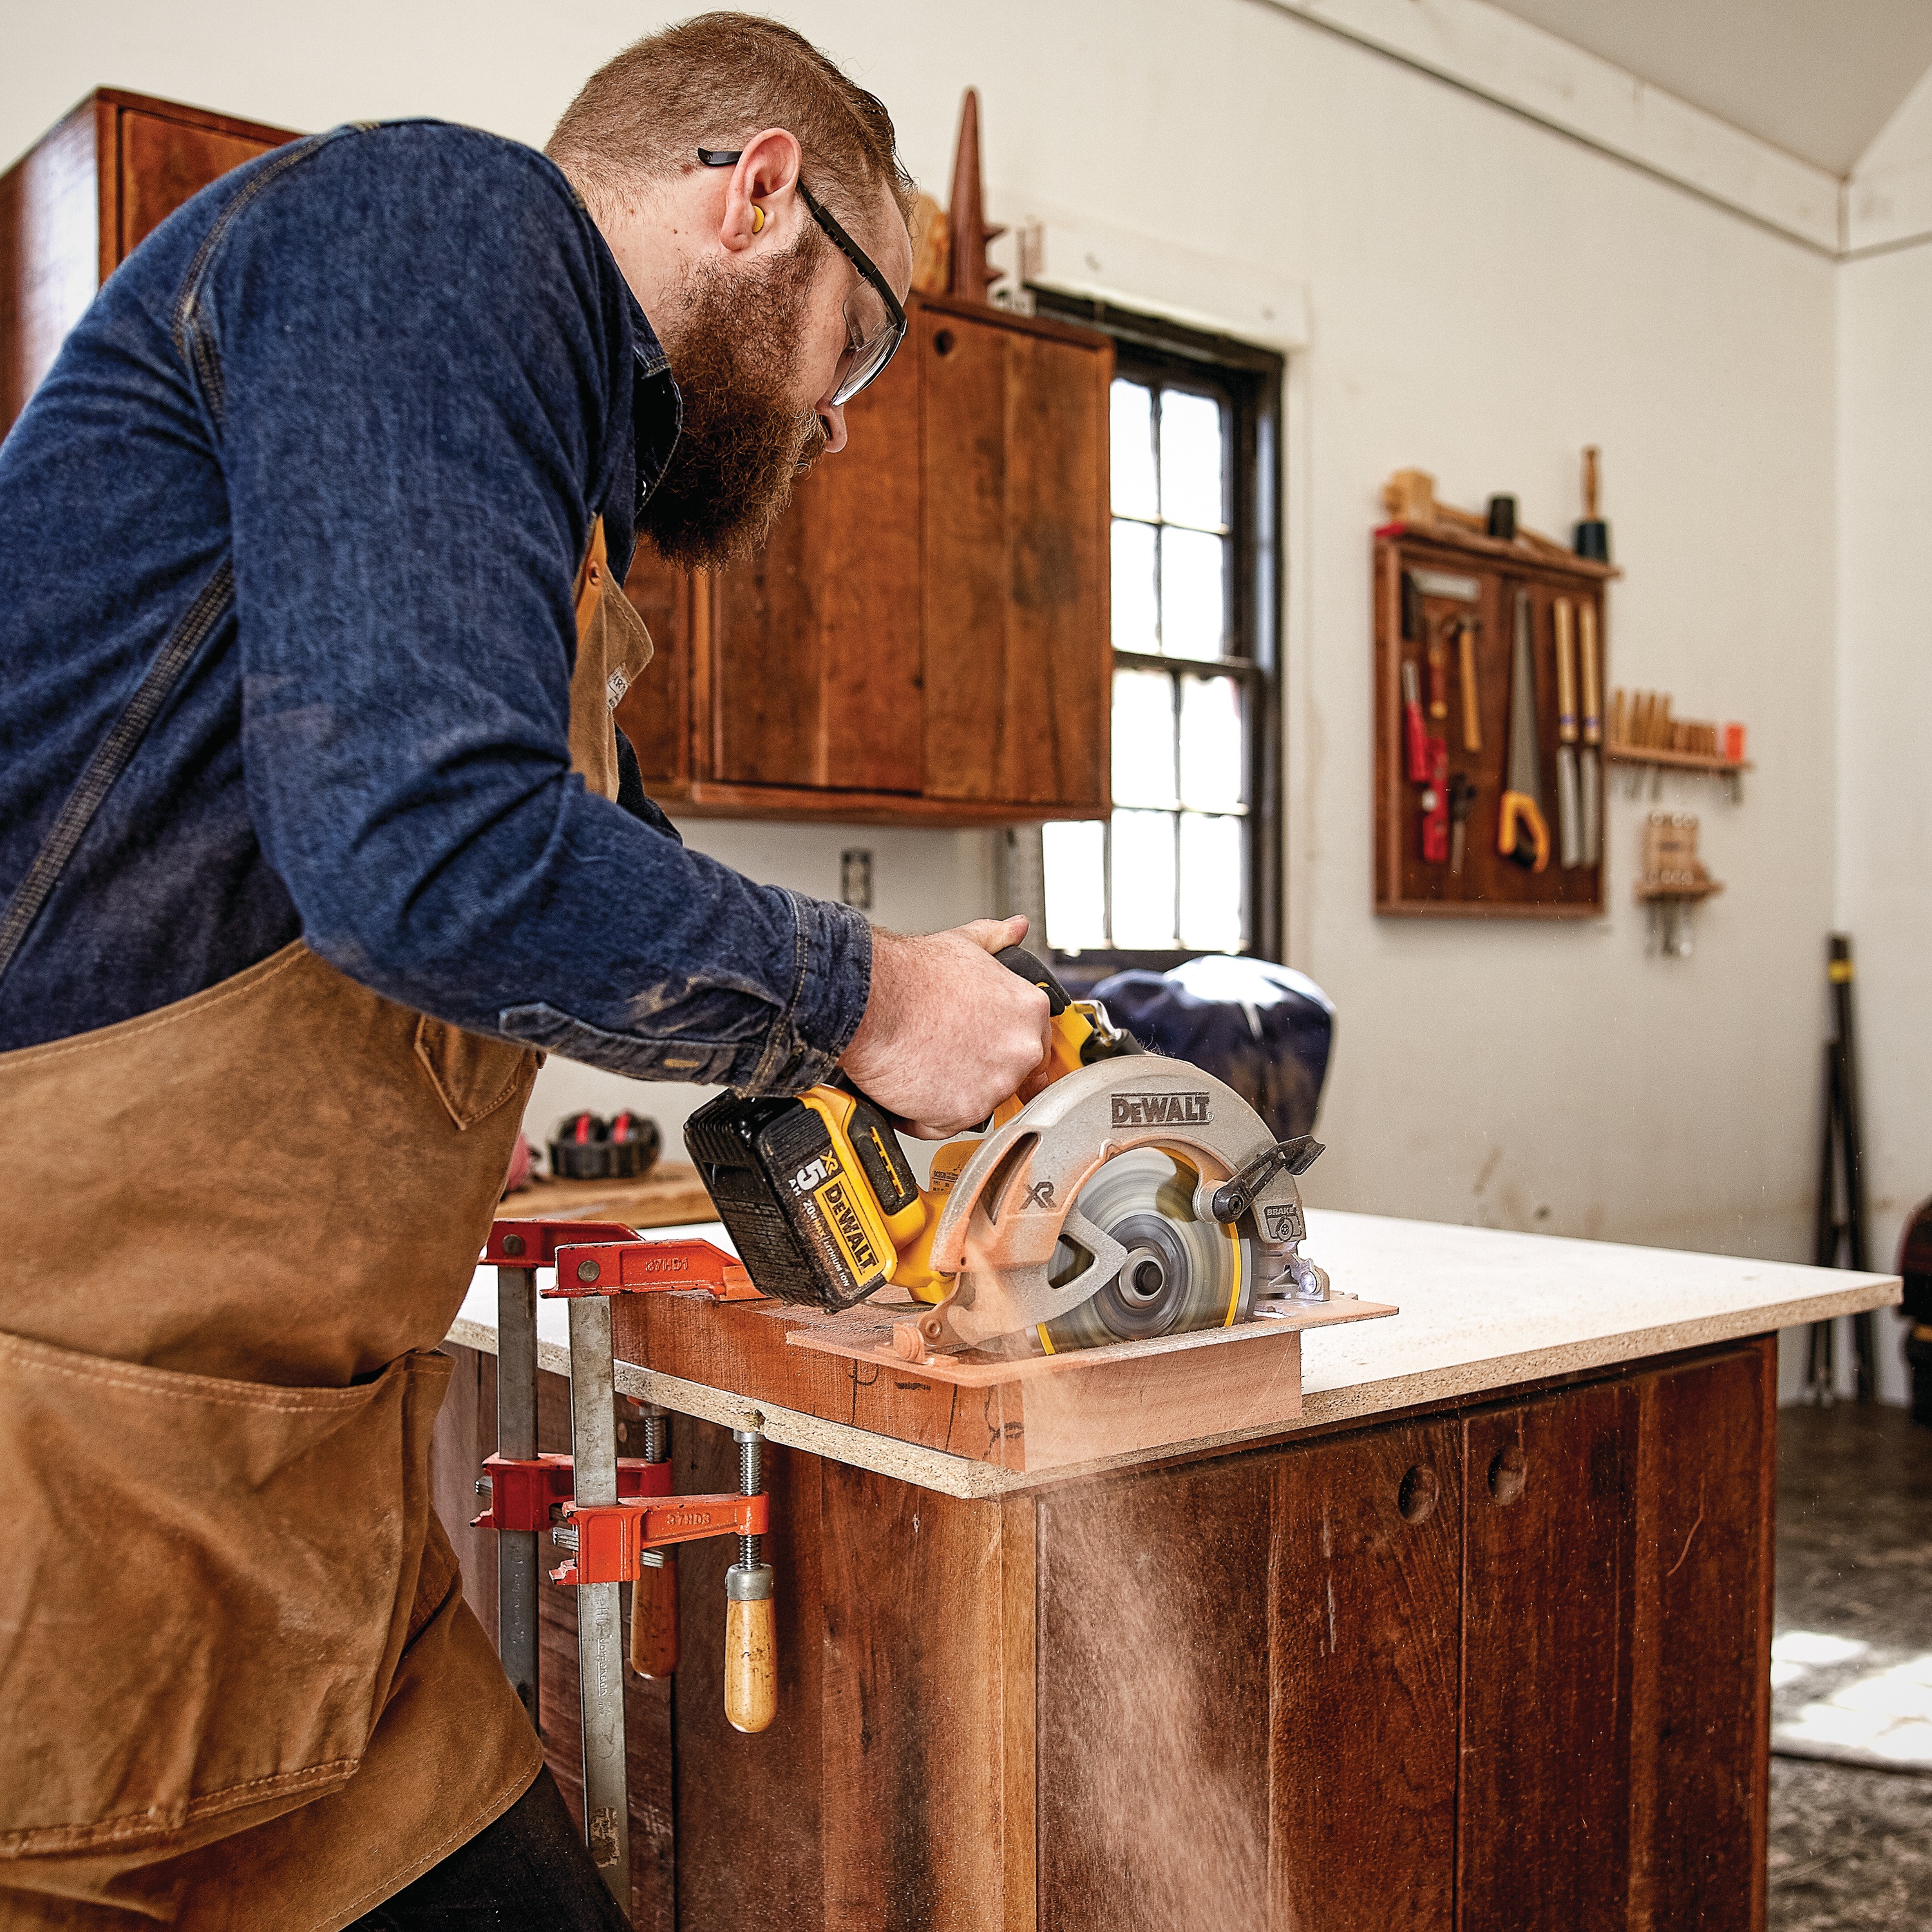 Profile of Cordless circular saw being used by person on wood.